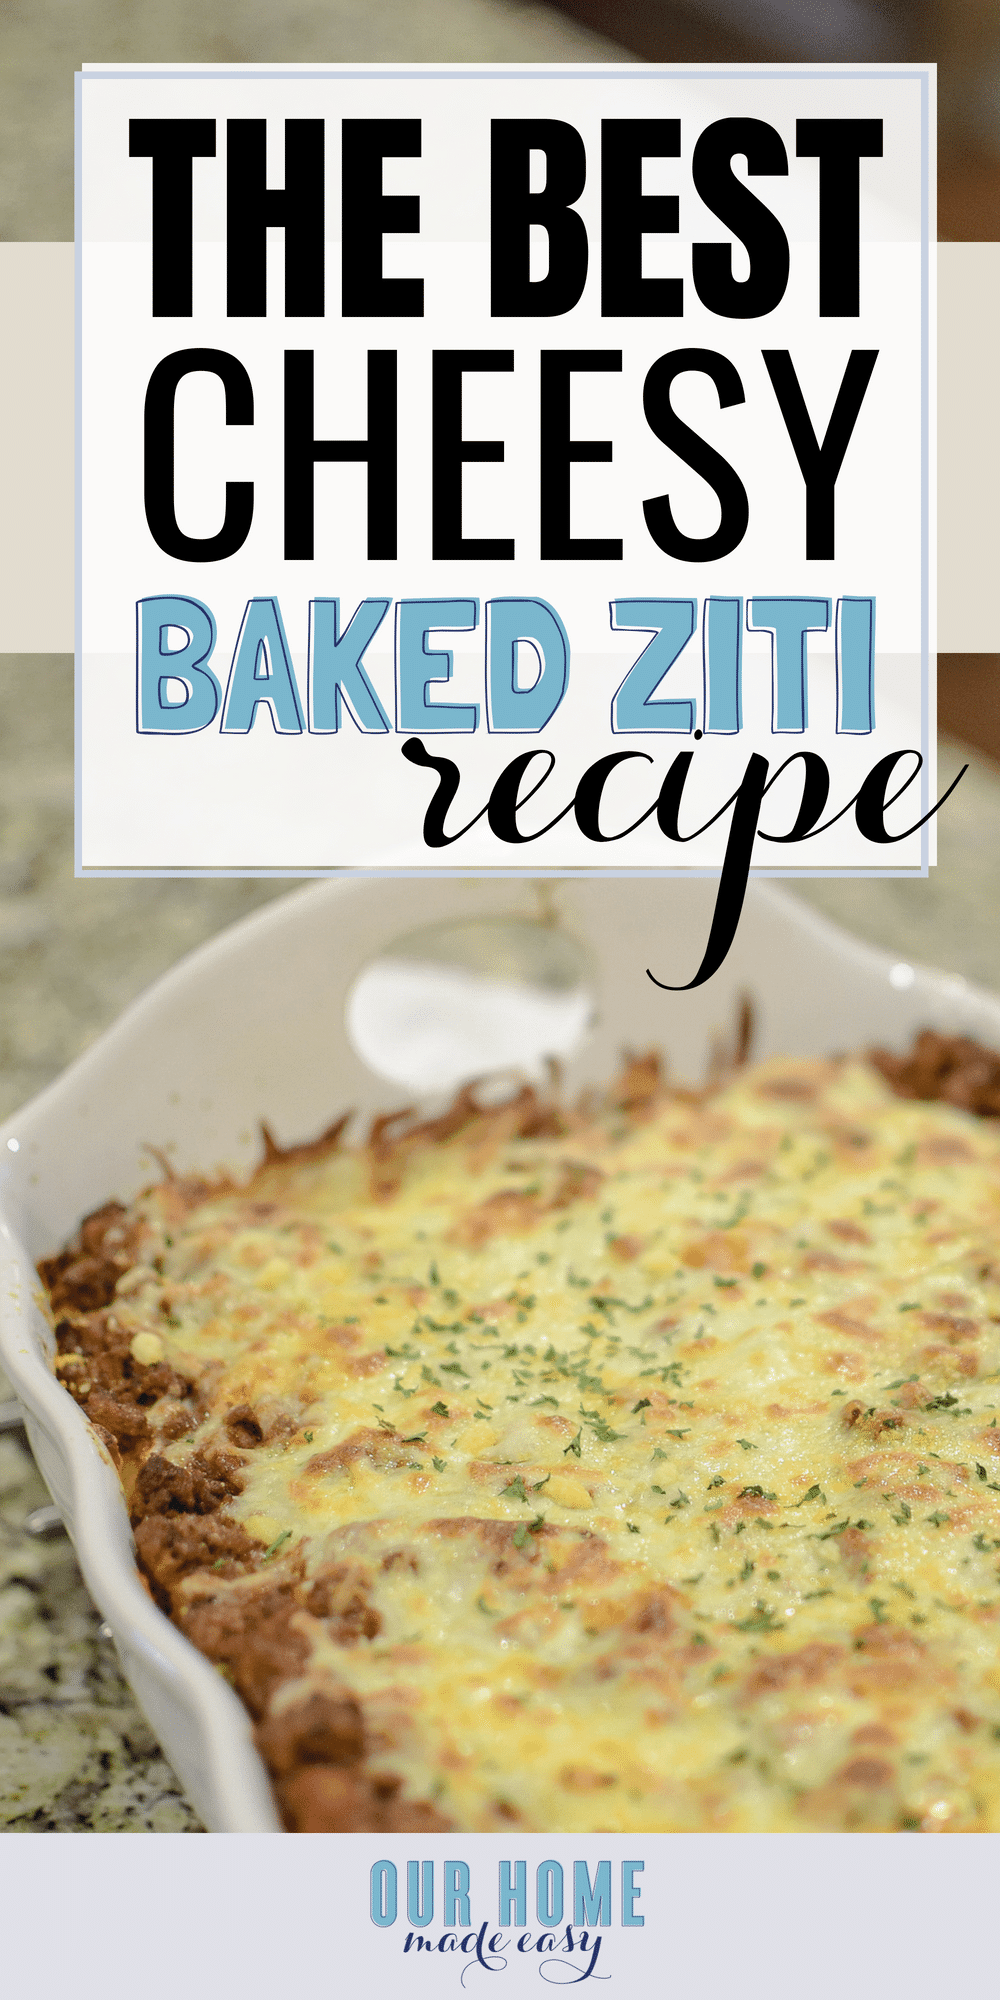 This a perfect Sunday night dinner! This easy baked ziti is super easy to make and feeds a large family! Click to see the recipe #dinner #pasta #dinnerecipe #italian #cheese #yum